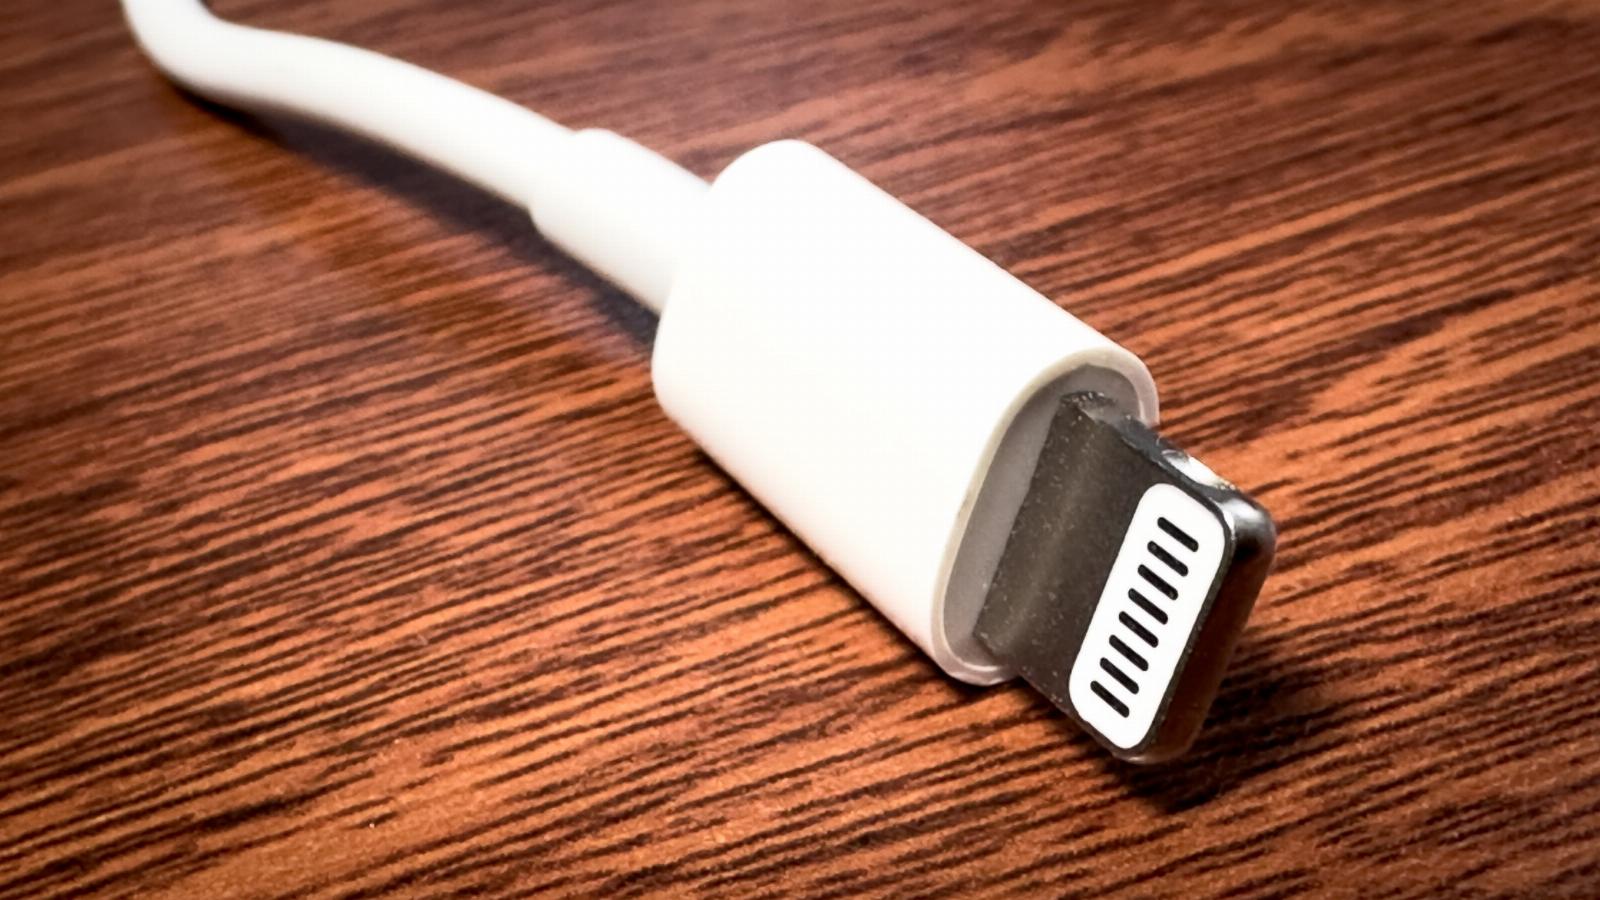 Apple ditches the Lightning connector in favor of USB-C after exactly 11 years